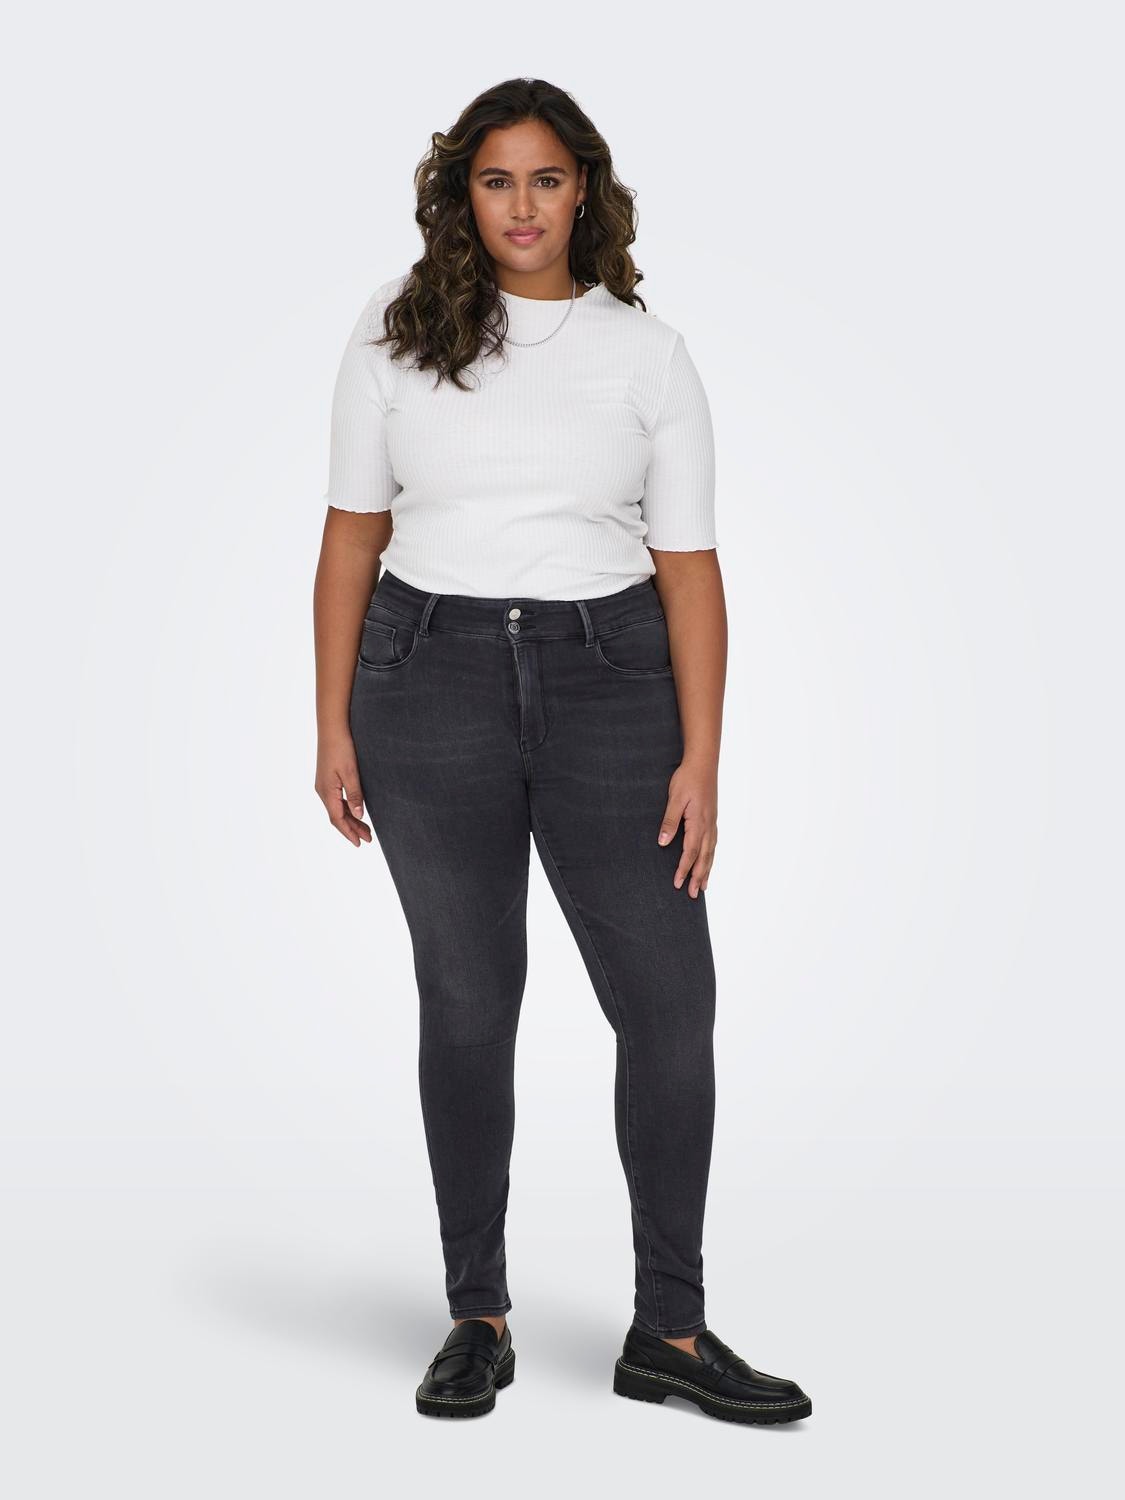 ONLY Skinny Fit High waist Jeans -Washed Black - 15277792